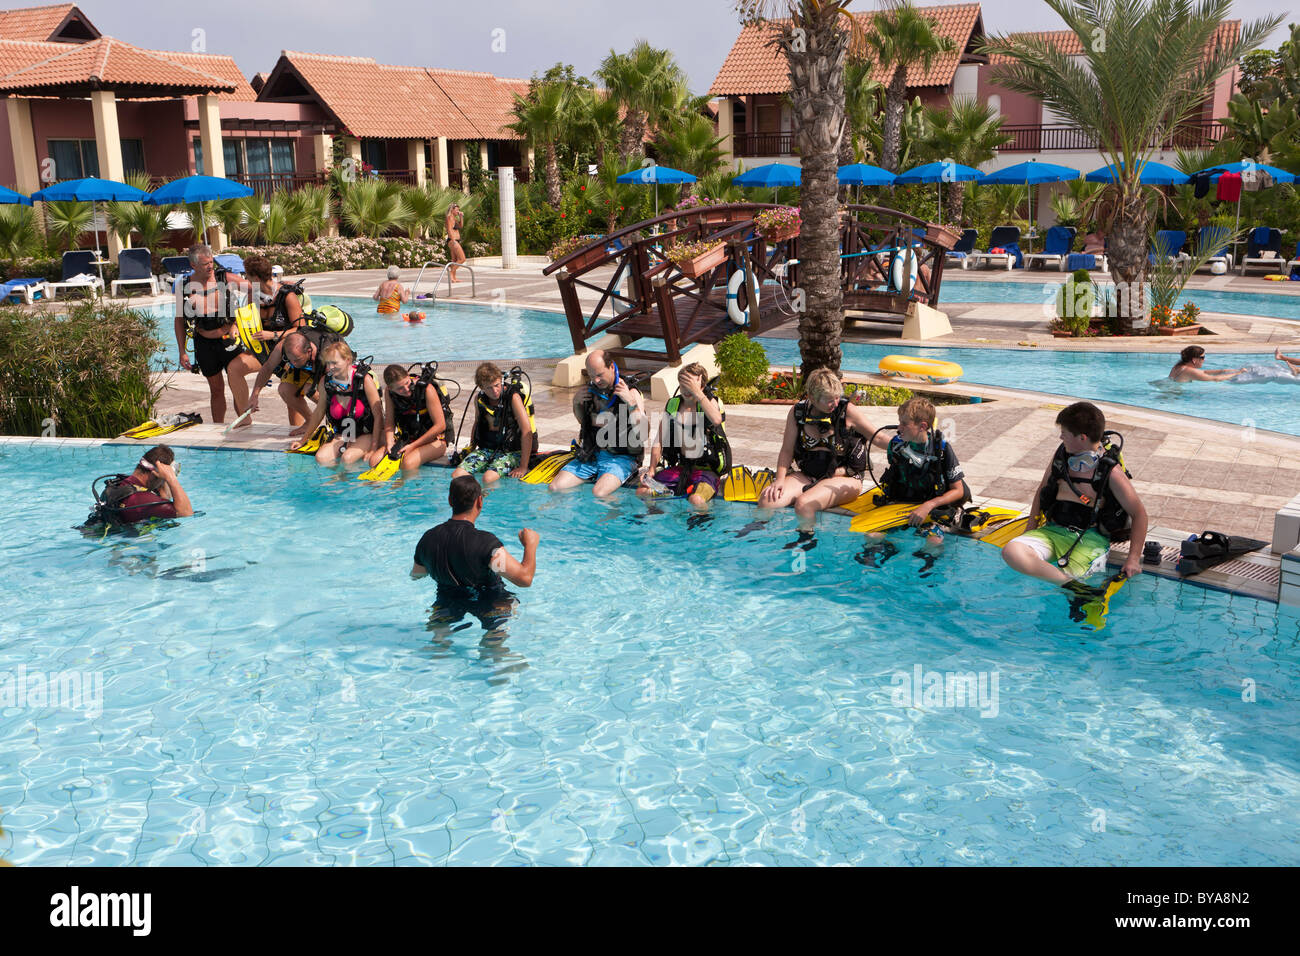 Children are trained by diving instructors in a swimming pool, Club Aldiana, Southern Cyprus, Cyprus Stock Photo